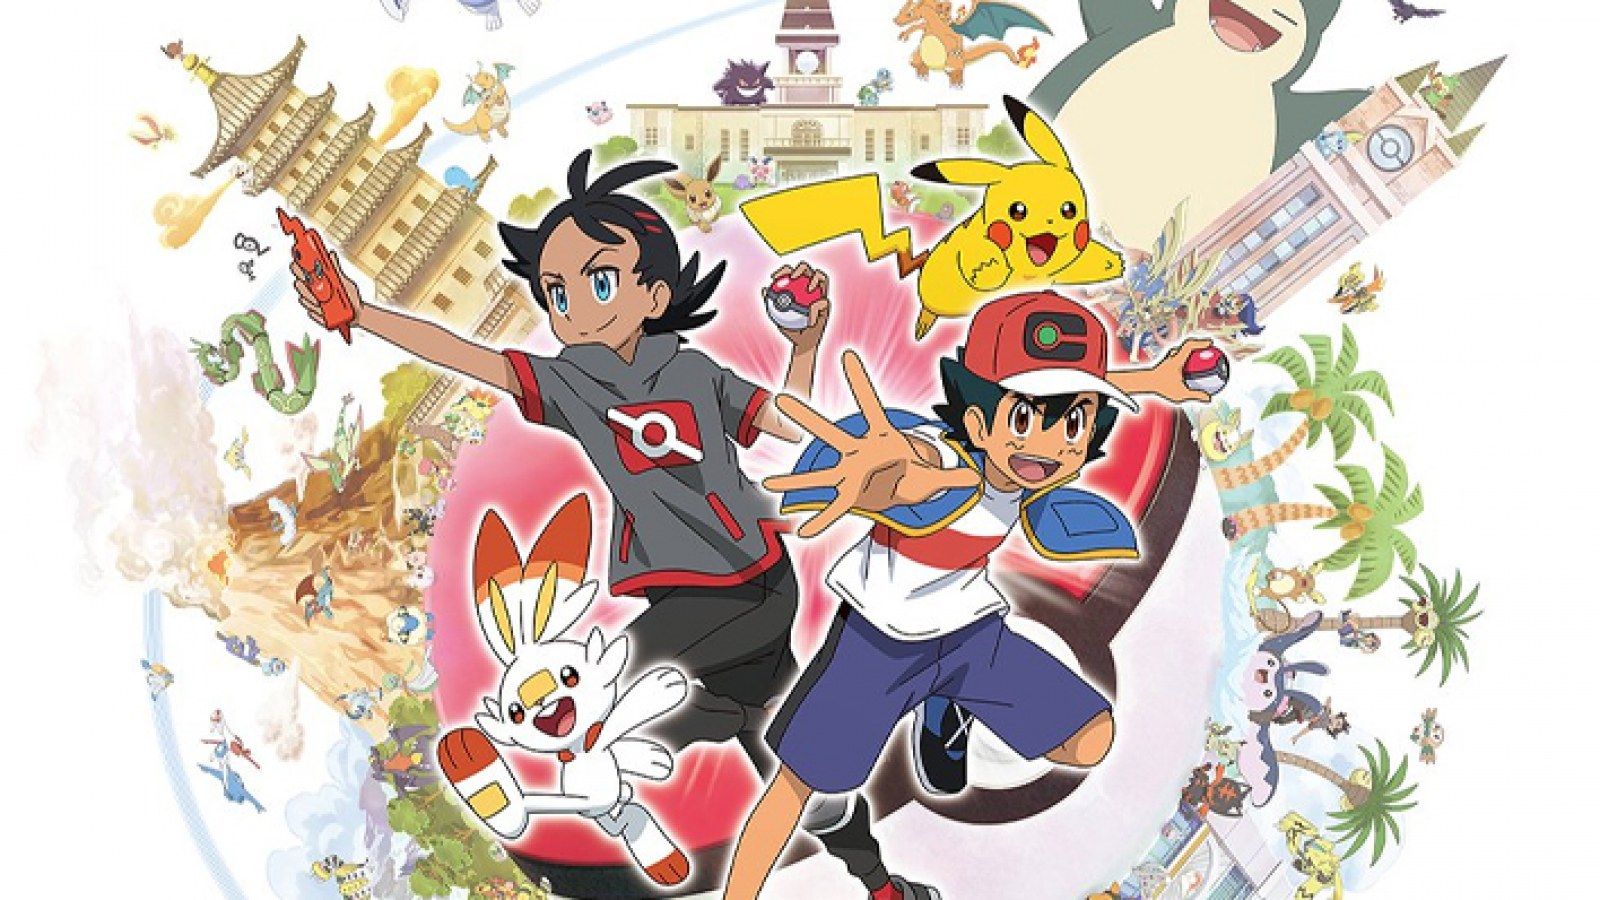 New 'Pokémon' Anime Confirms Upcoming Series to Include Ash, Pikachu and New Character